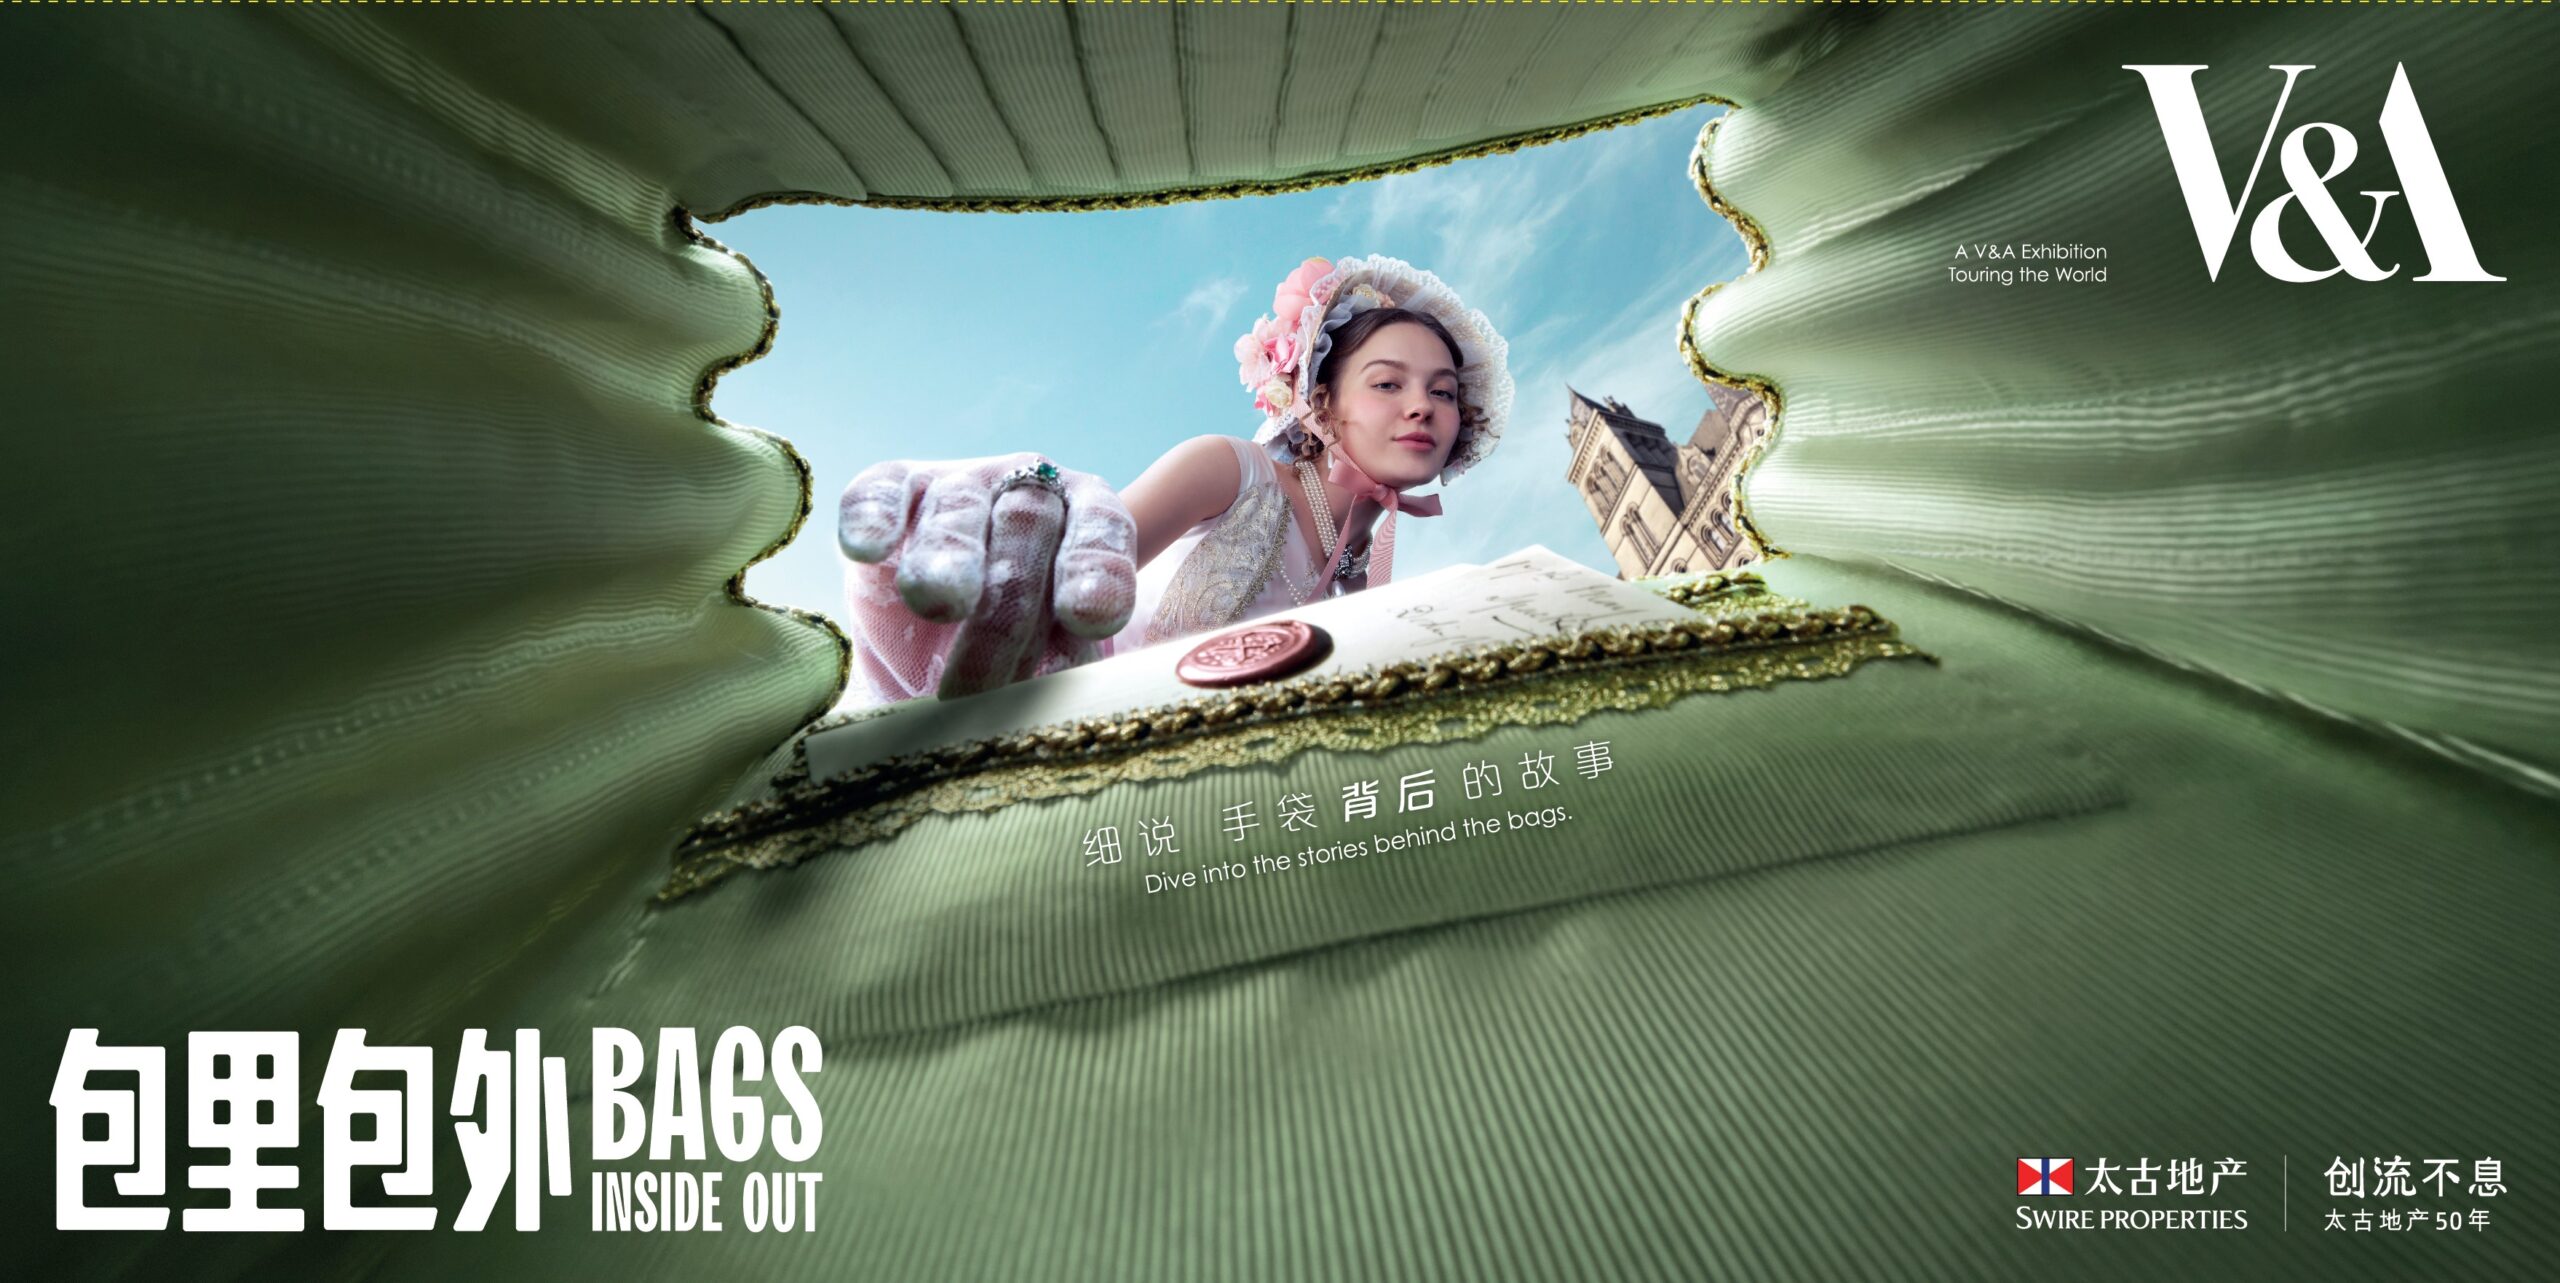 Swire Properties presents inaugural Asian tour of “Bags: Inside Out” -  Sinclair Arts